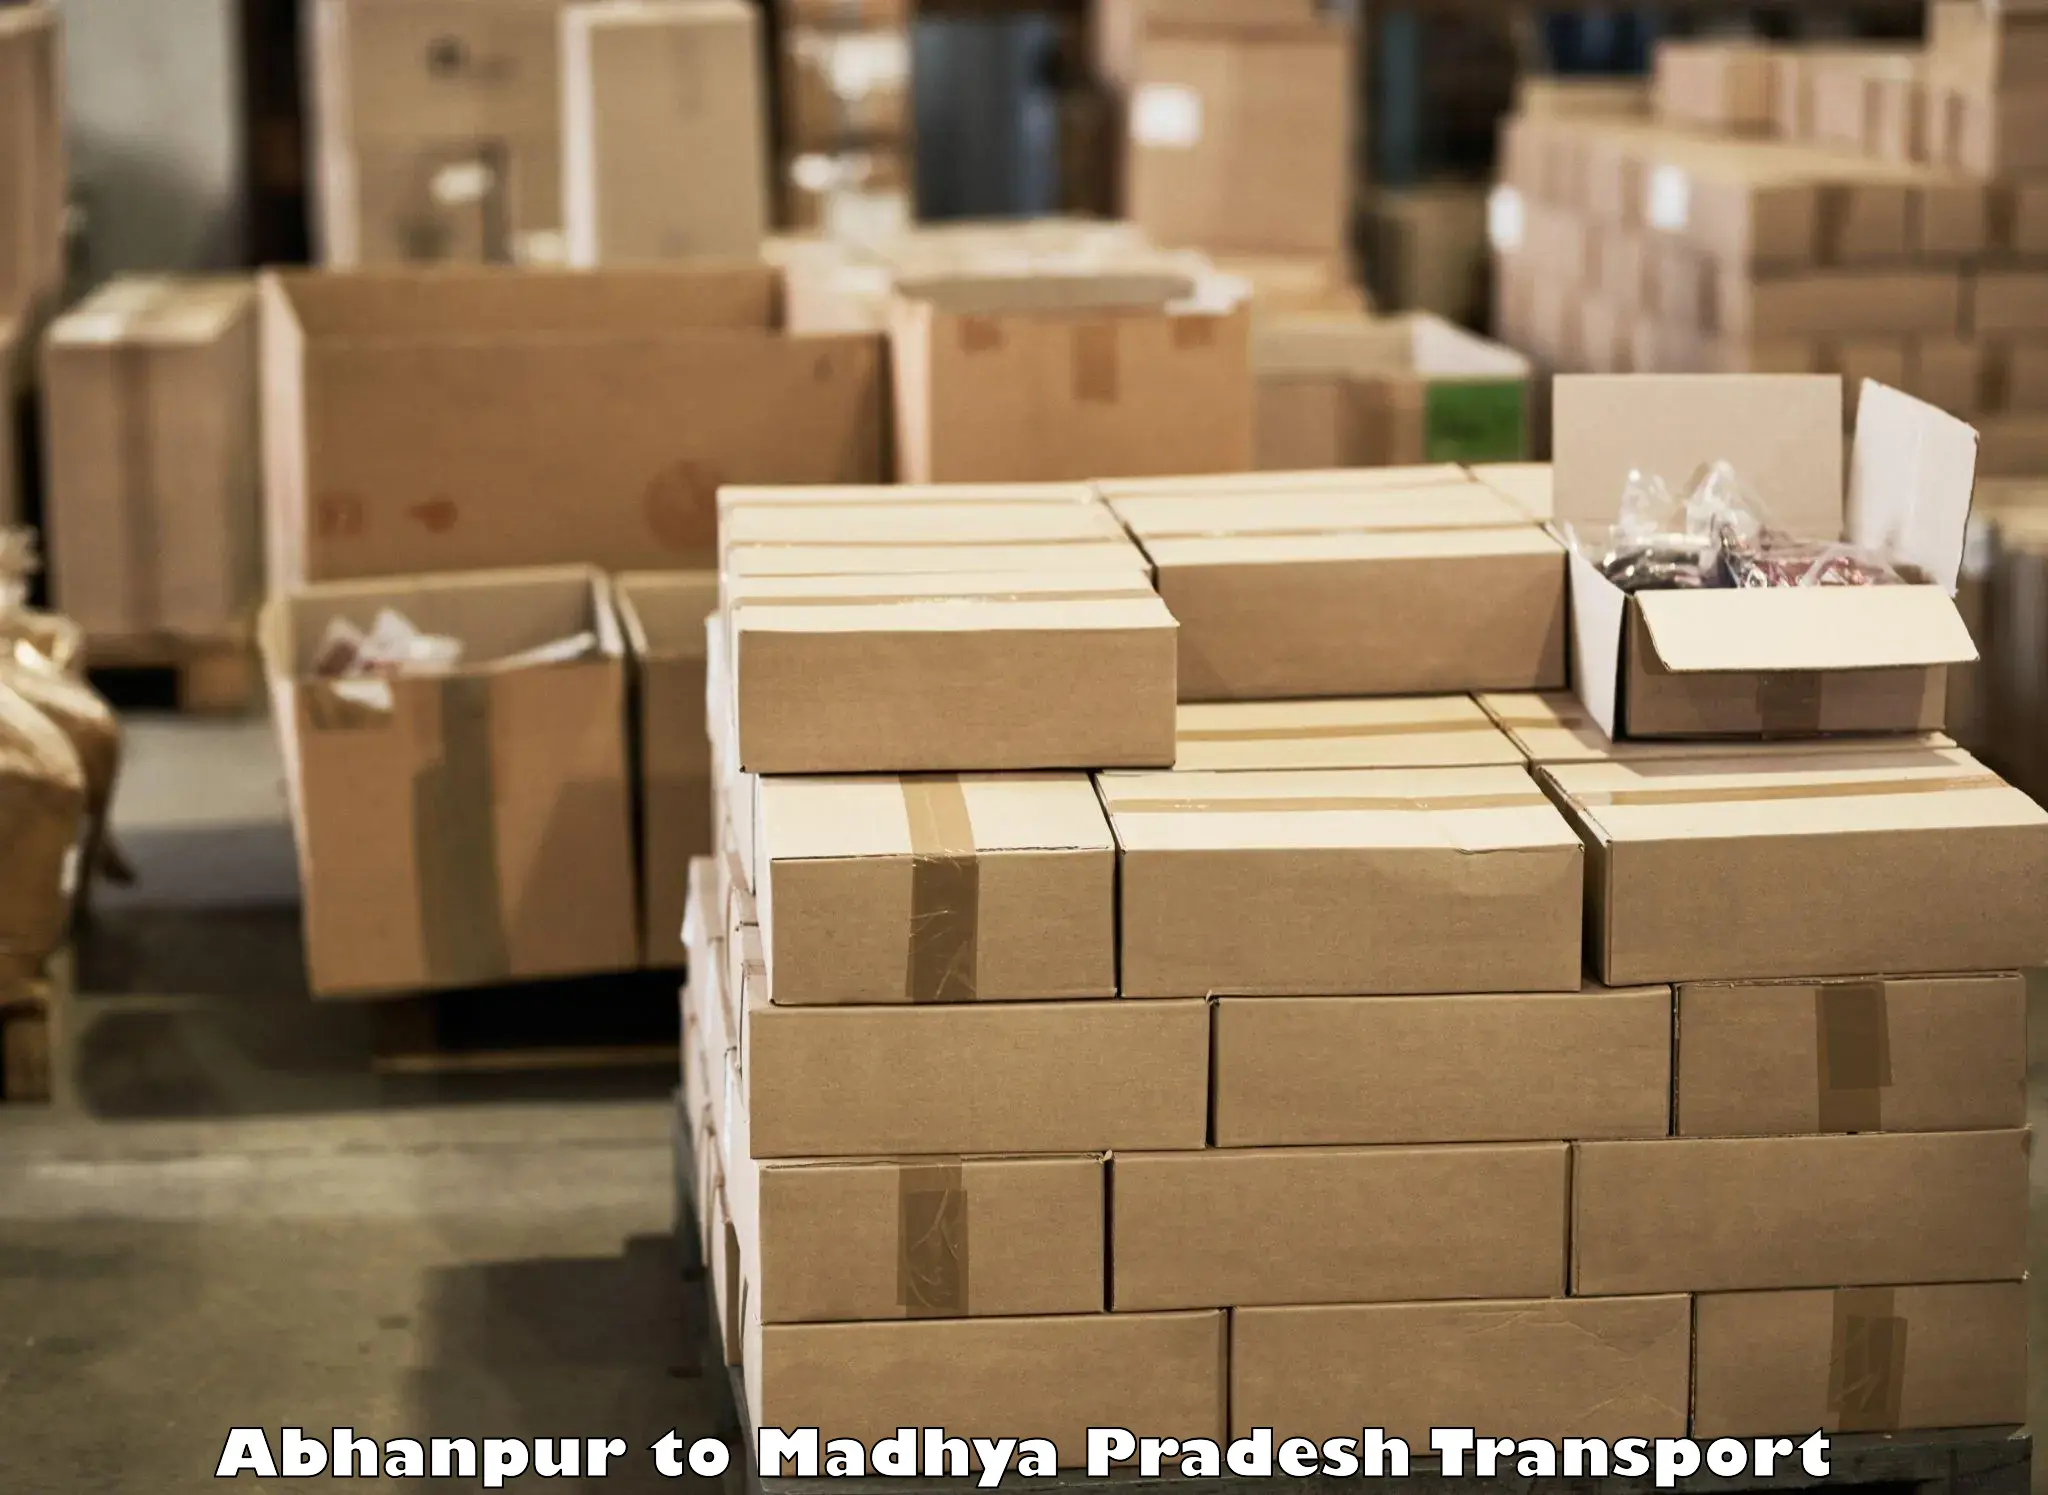 Transportation solution services Abhanpur to BHEL Bhopal